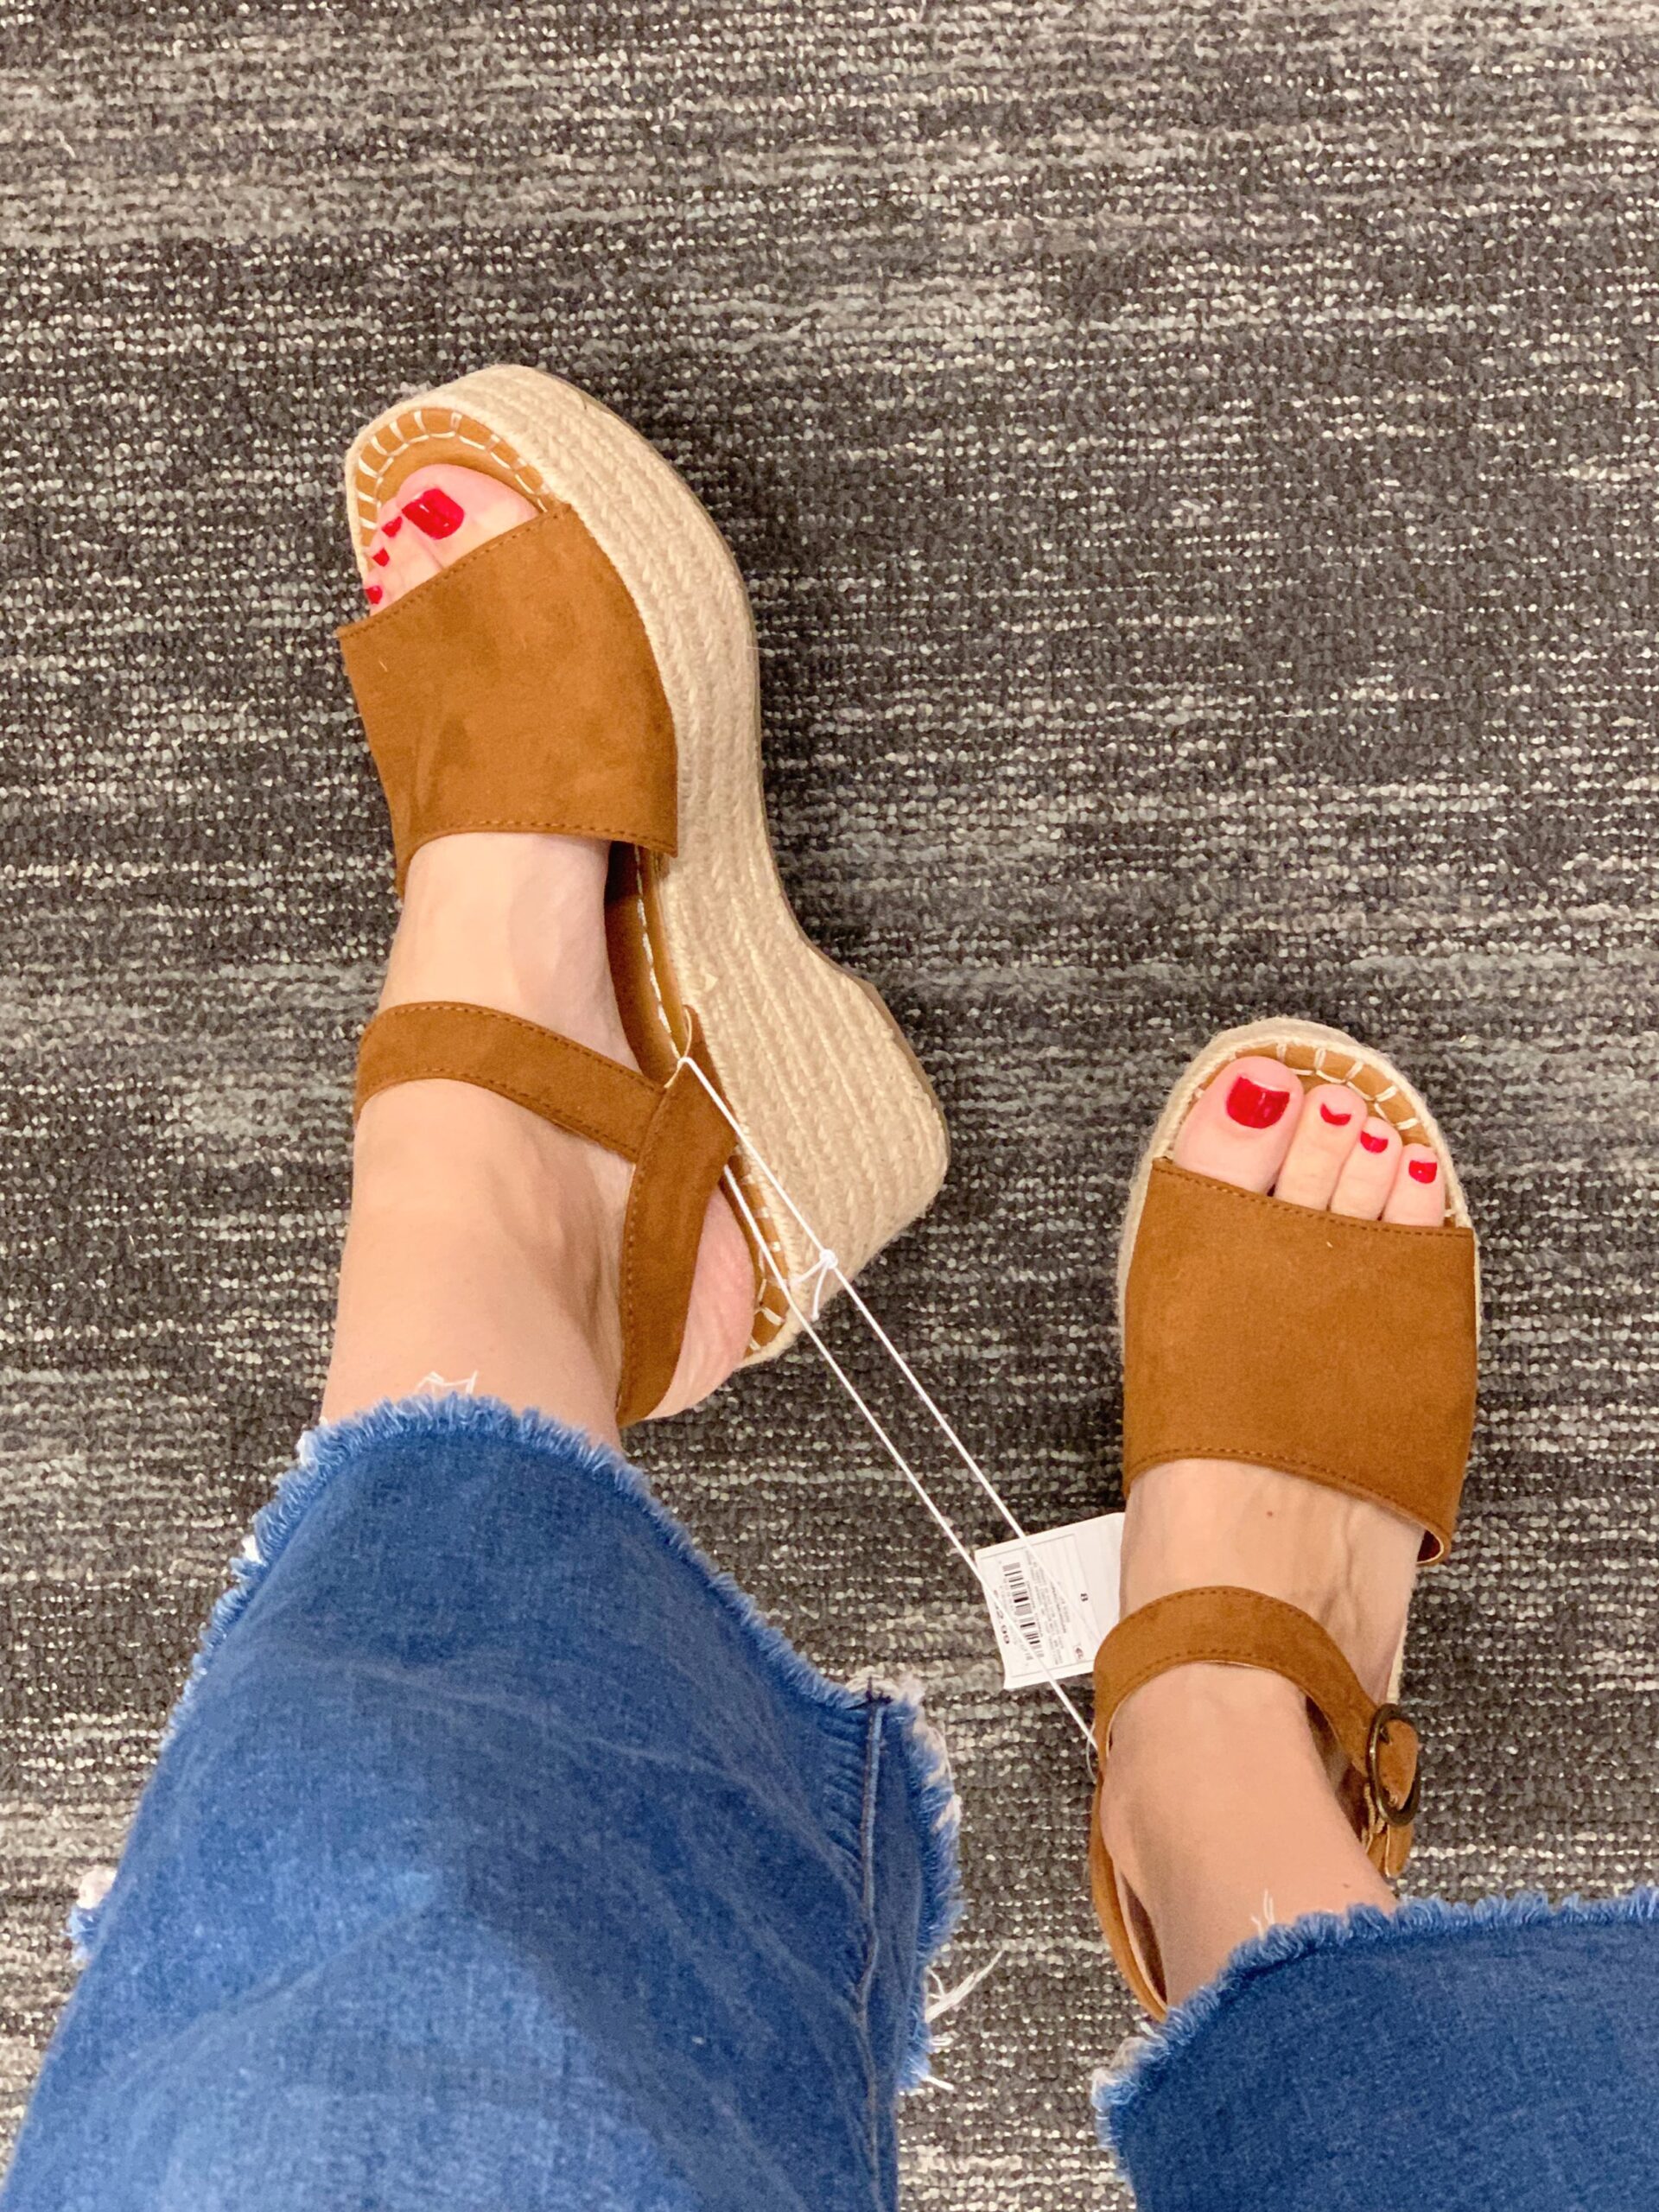 I have been admiring these at a distance for a few weeks and finally decided to try them on today. I love a platform espadrille and these were really comfortable too. They also come in blue, black, orange and leopard (which is sold out online).